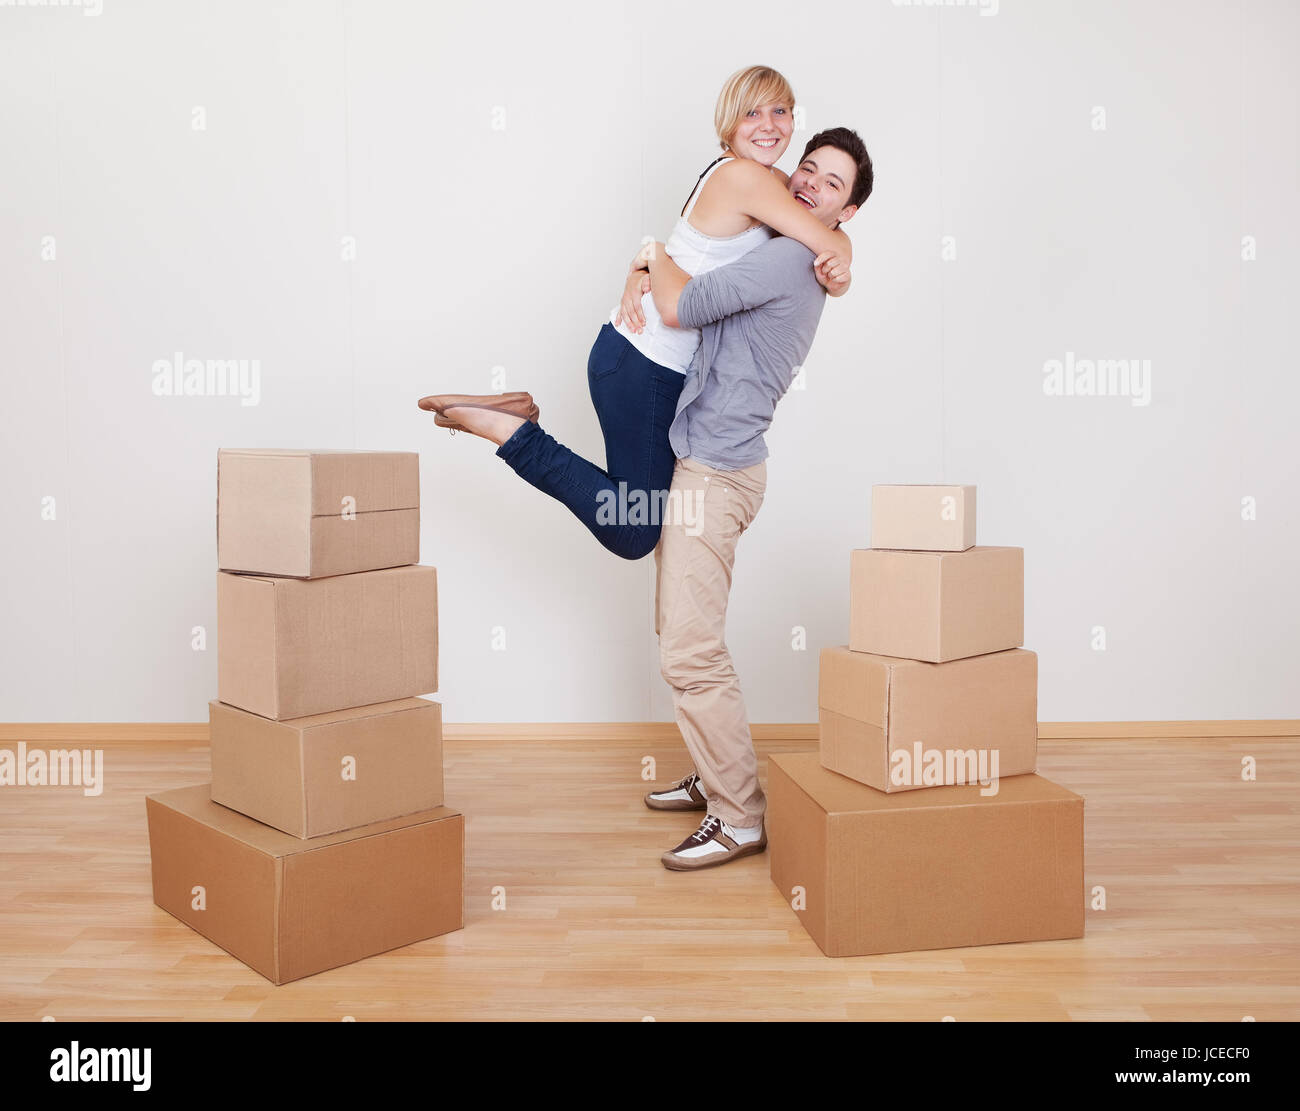 Happy young couple in a close ecstatic embrace smiling happily as they stand surrounded by cartons in their new home Stock Photo